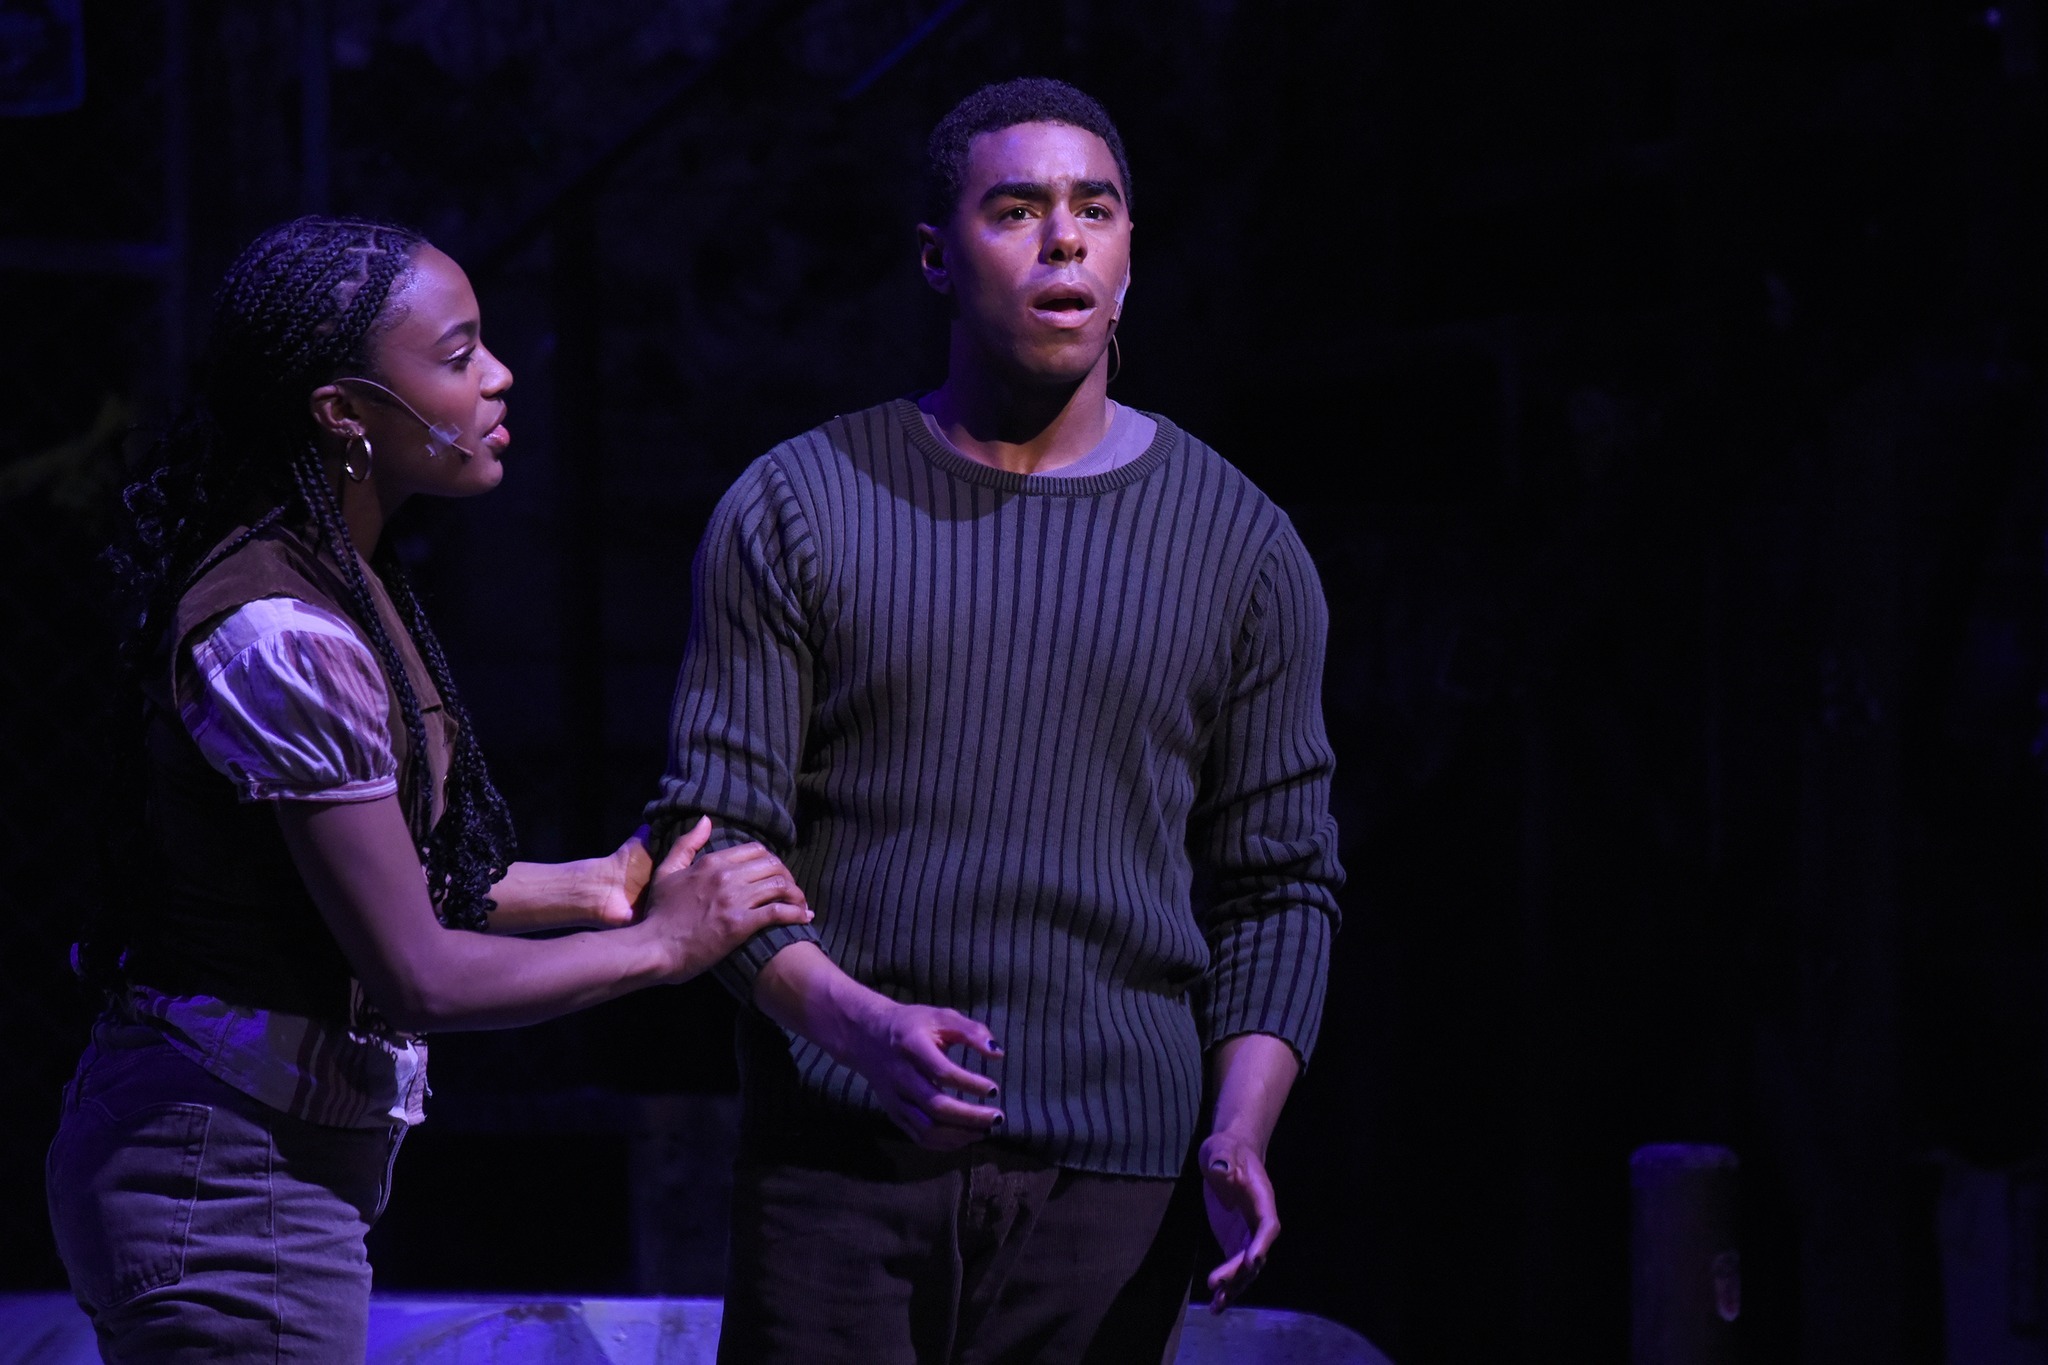 A dark photo of two students performing on stage. The one on the left is a woman wearing a short sleeve shirt and on the right is a man in a dark sweater.